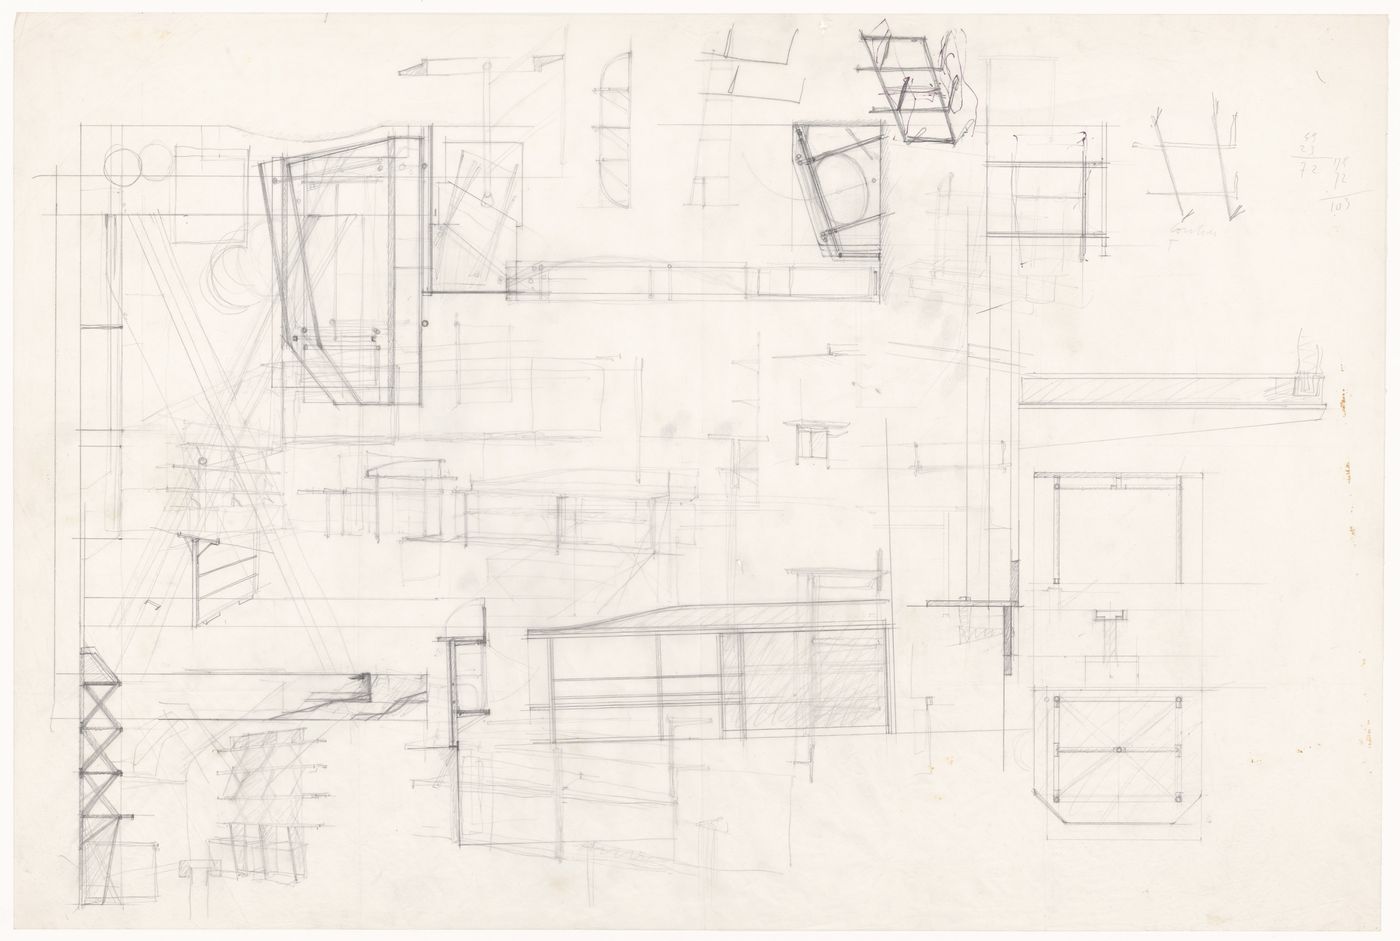 Plans, elevations and details for Casa Frea, Milan, Italy